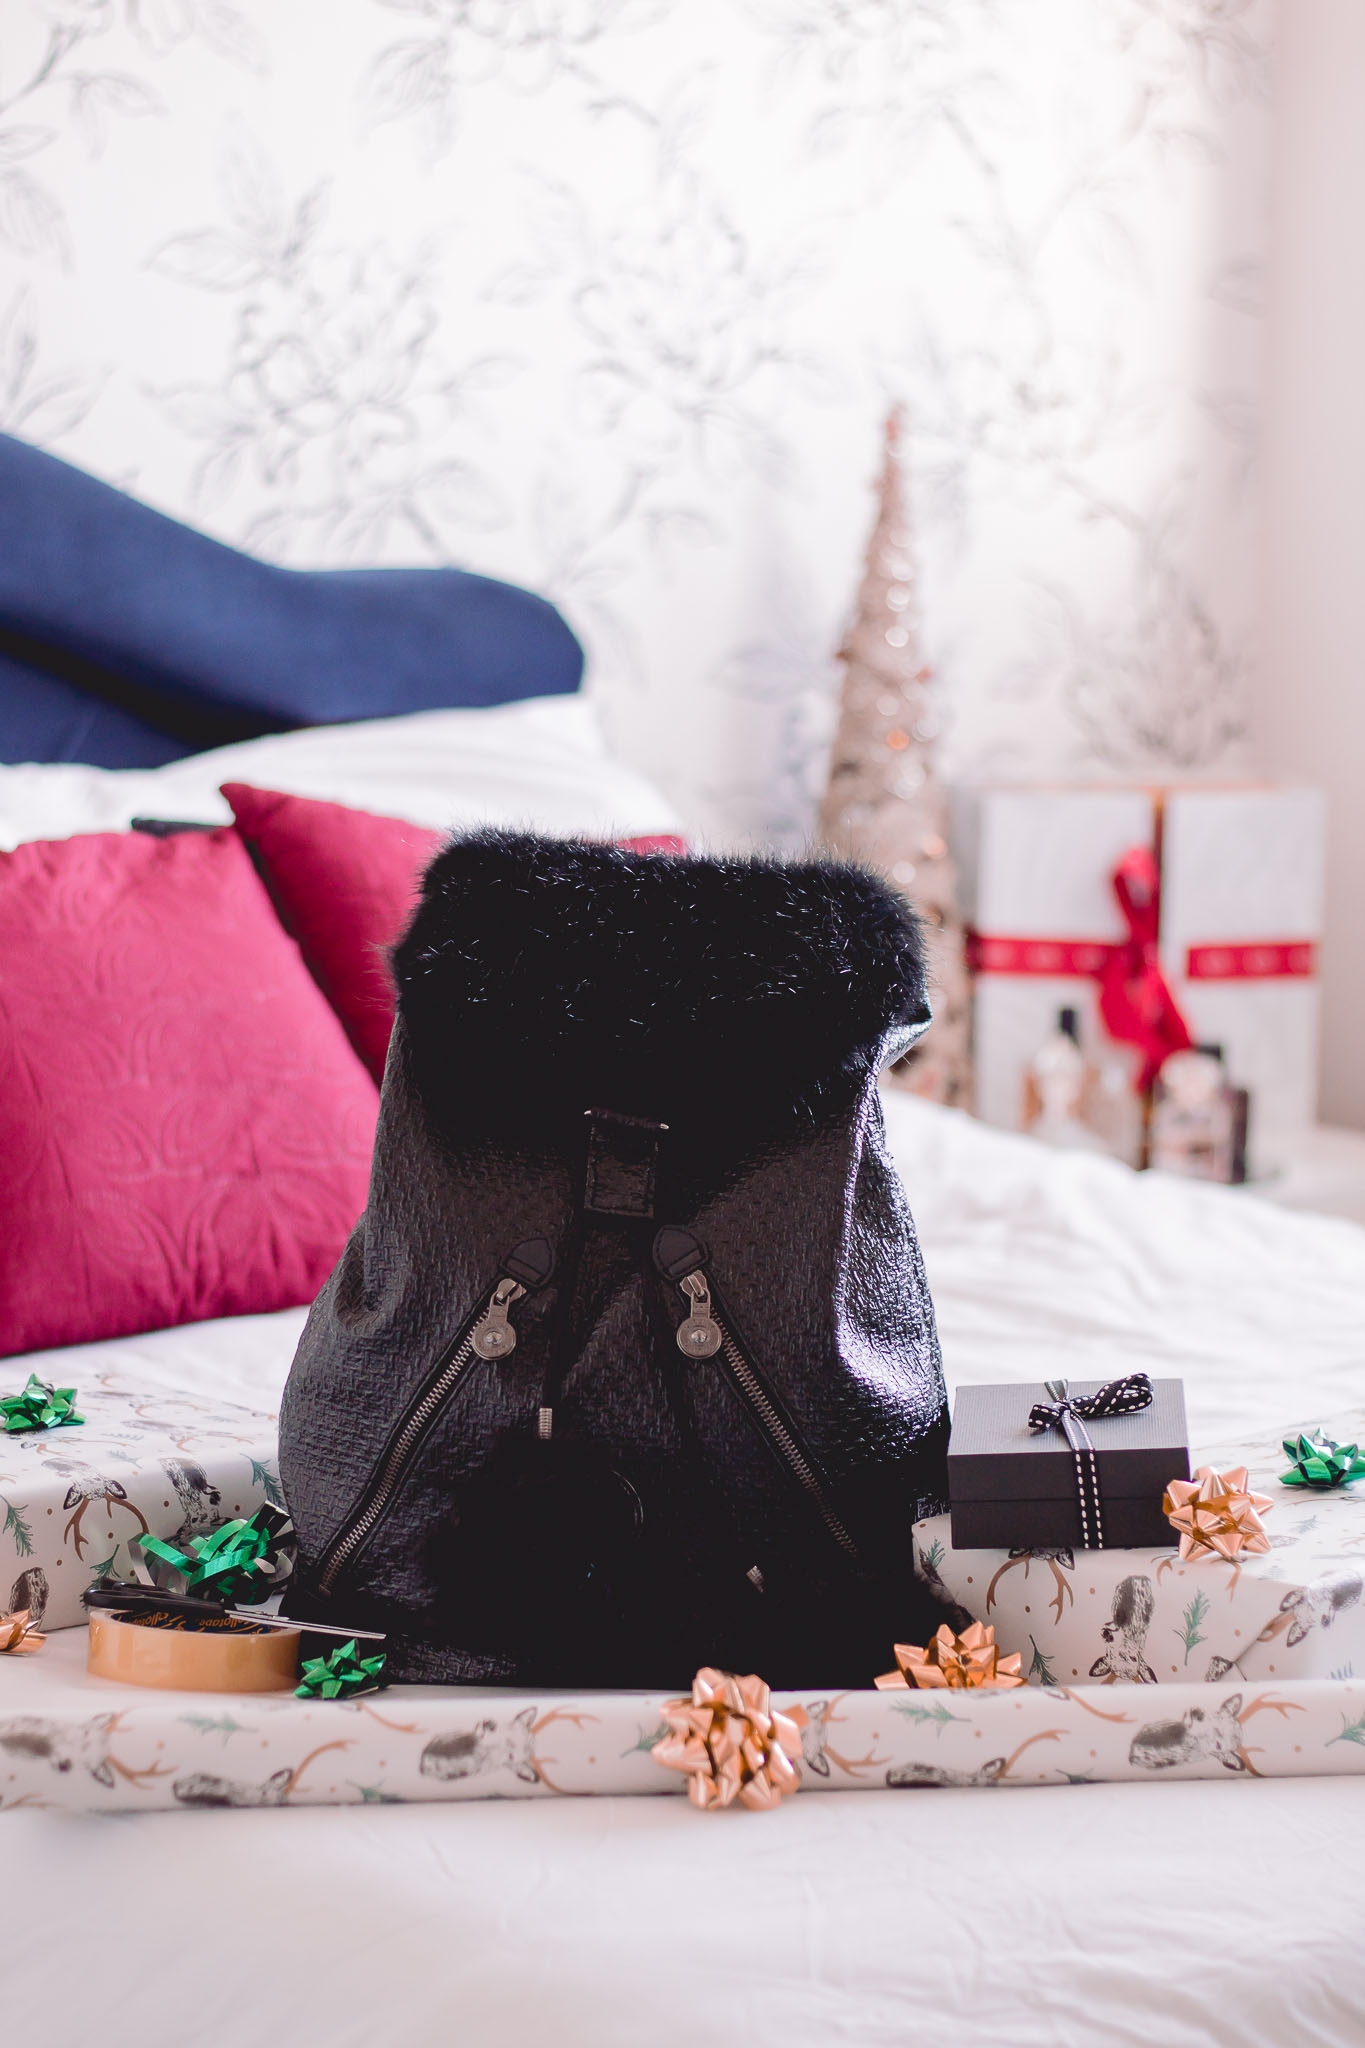 kipling bag on bed with gifts and gift wrapping